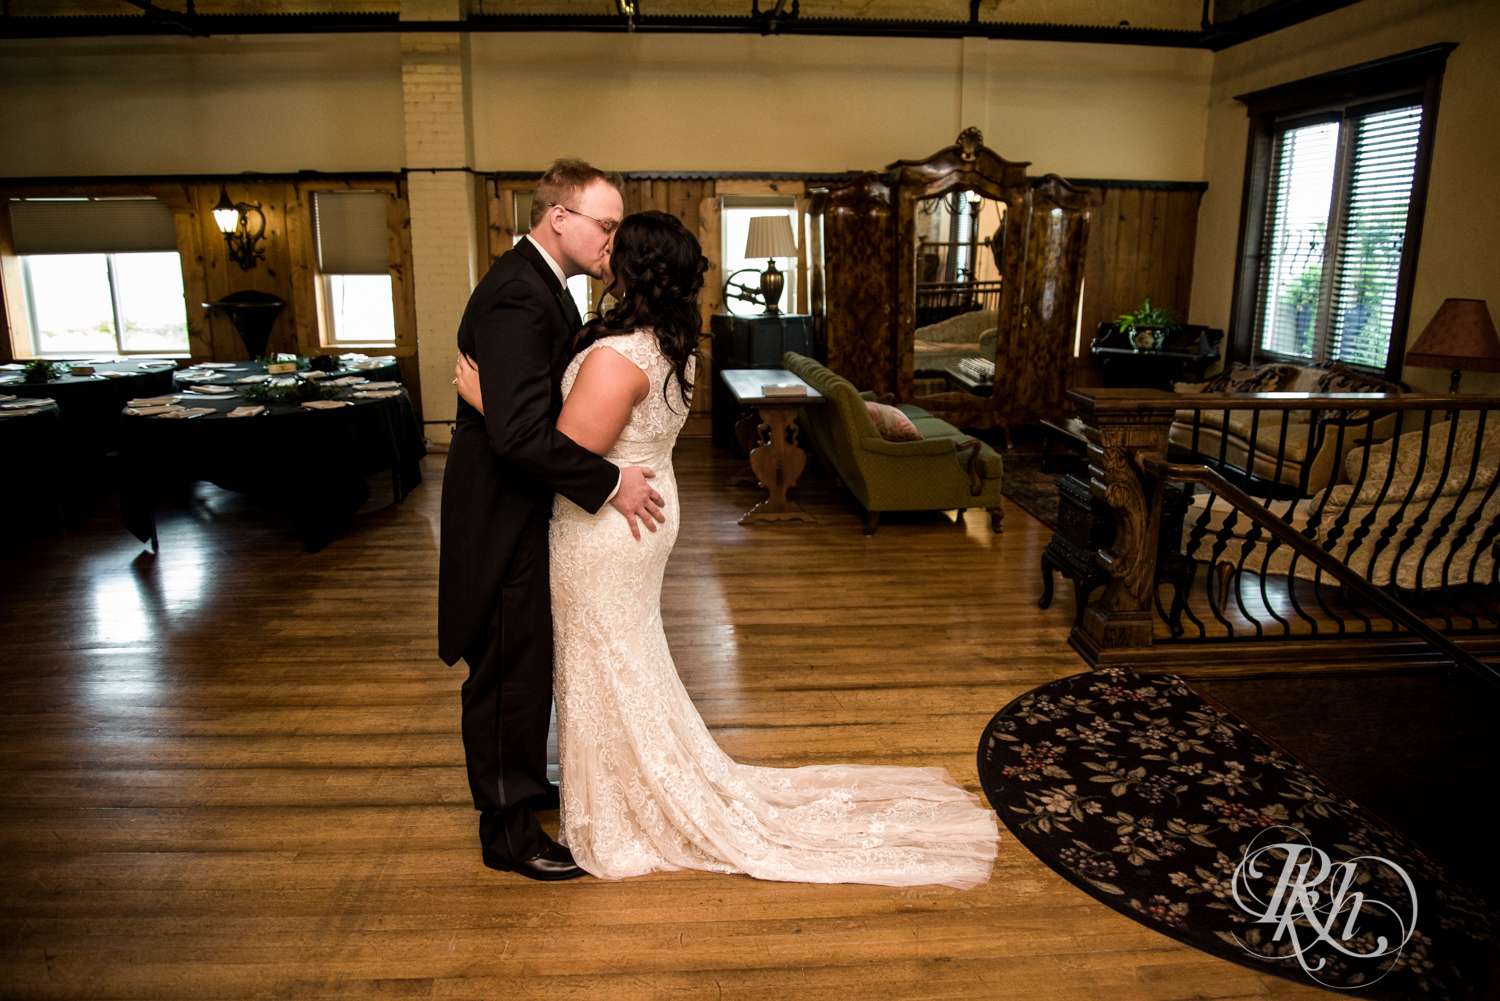 Bride and groom share first look at Kellerman's Event Center in White Bear Lake, Minnesota.